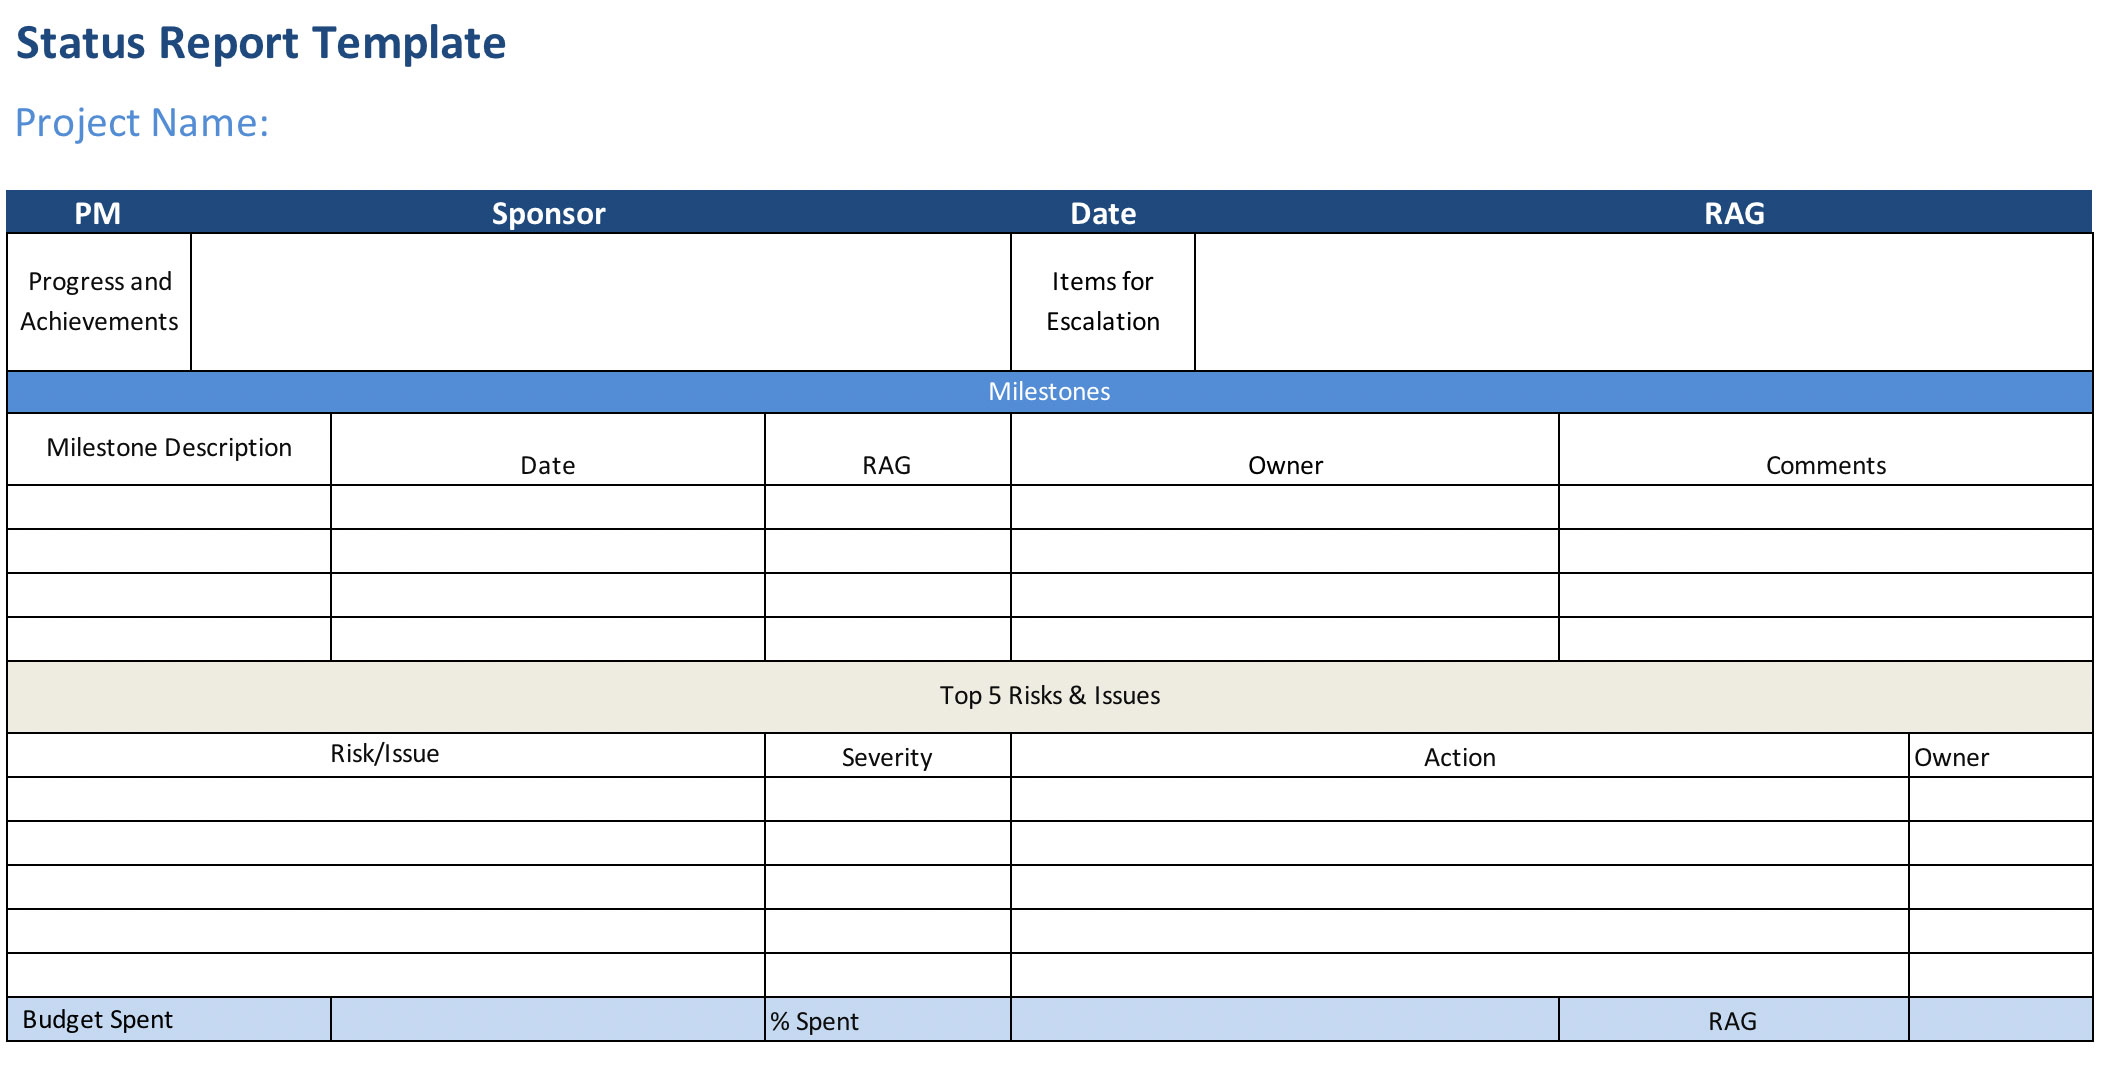 Project Status Report (Free Excel Template)